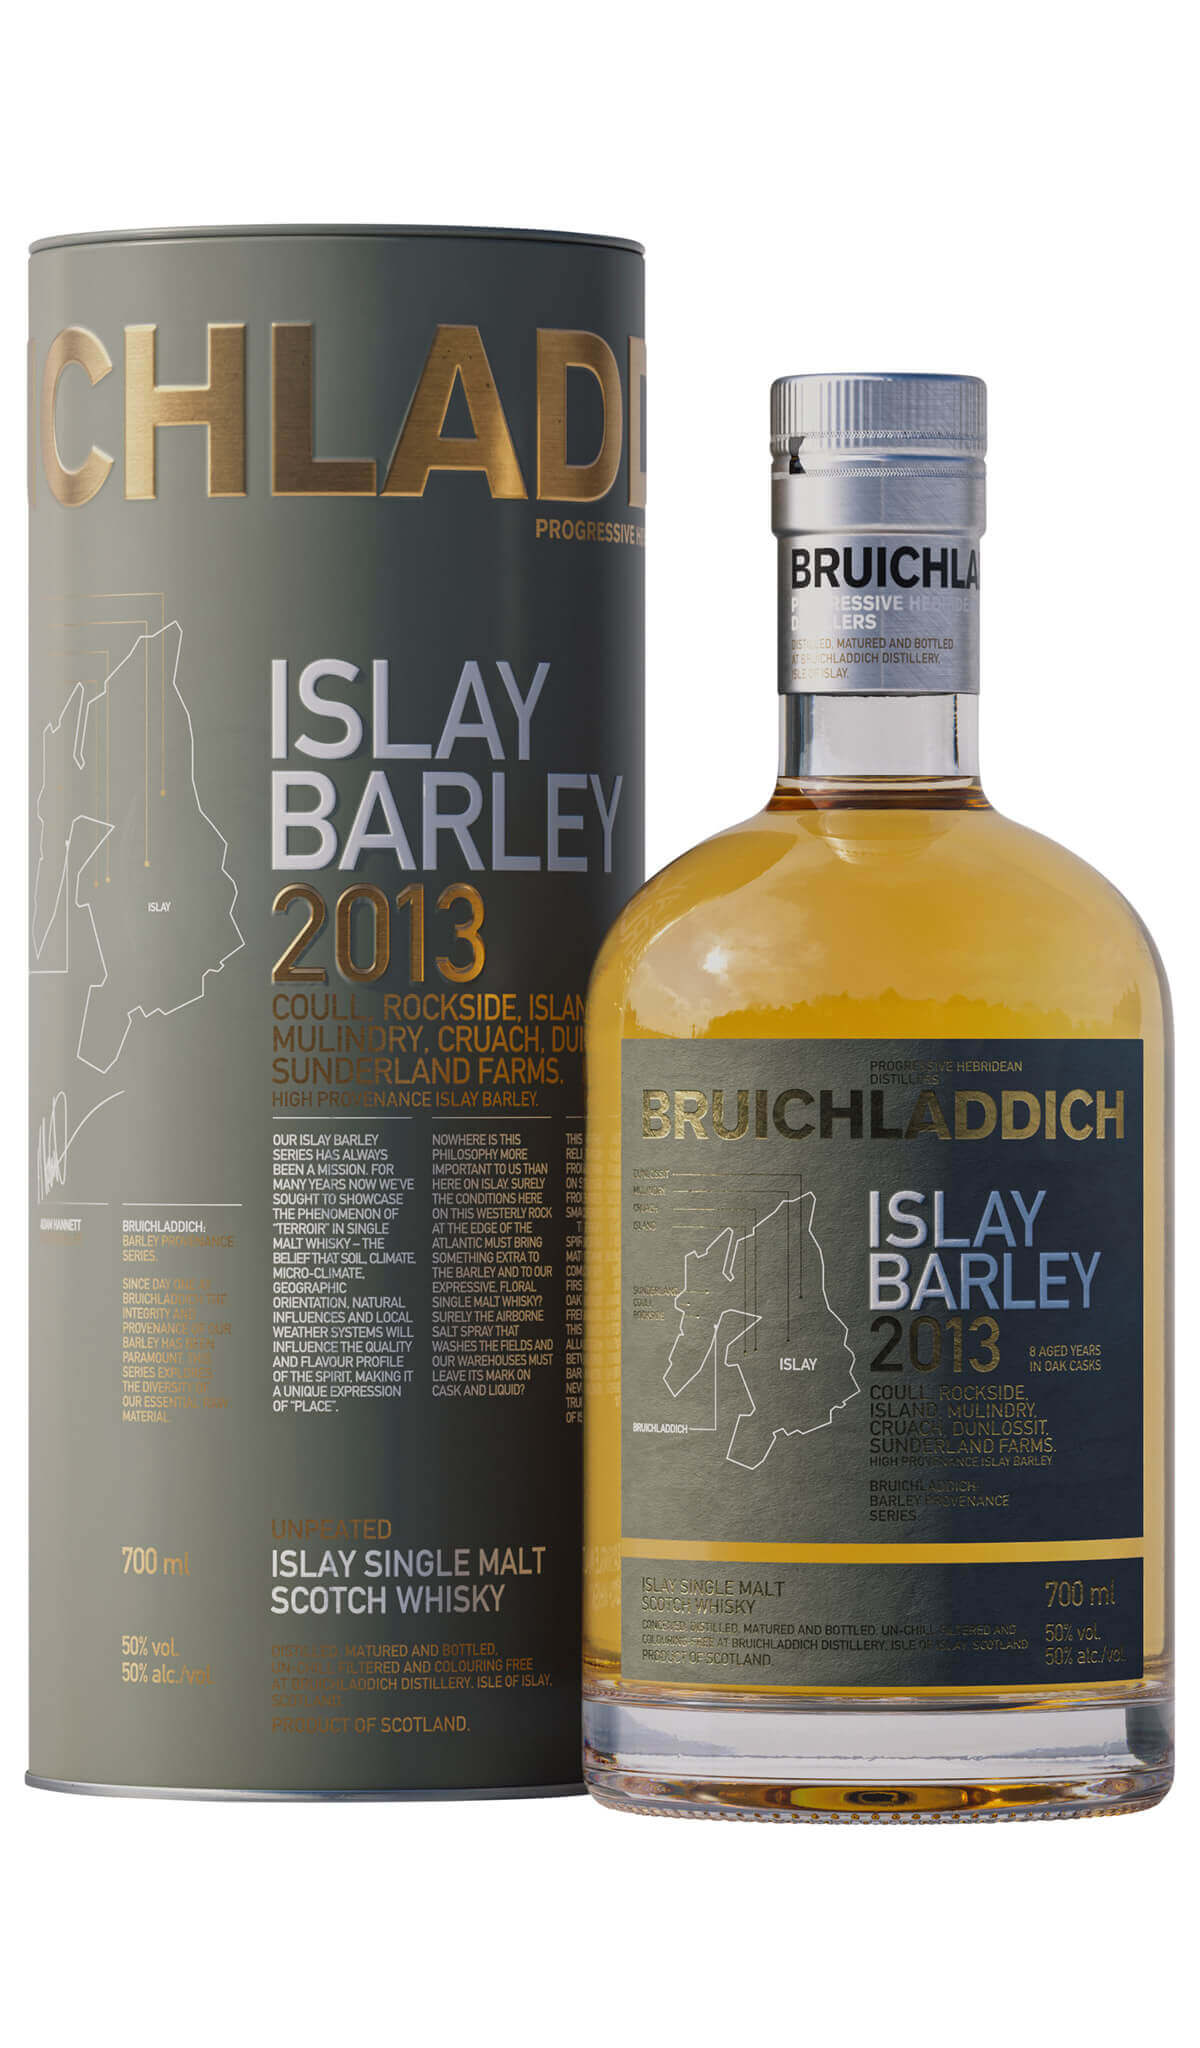 Find out more or buy Bruichladdich Islay Barley 2013 Unpeated 700ml online at Wine Sellers Direct - Australia’s independent liquor specialists.